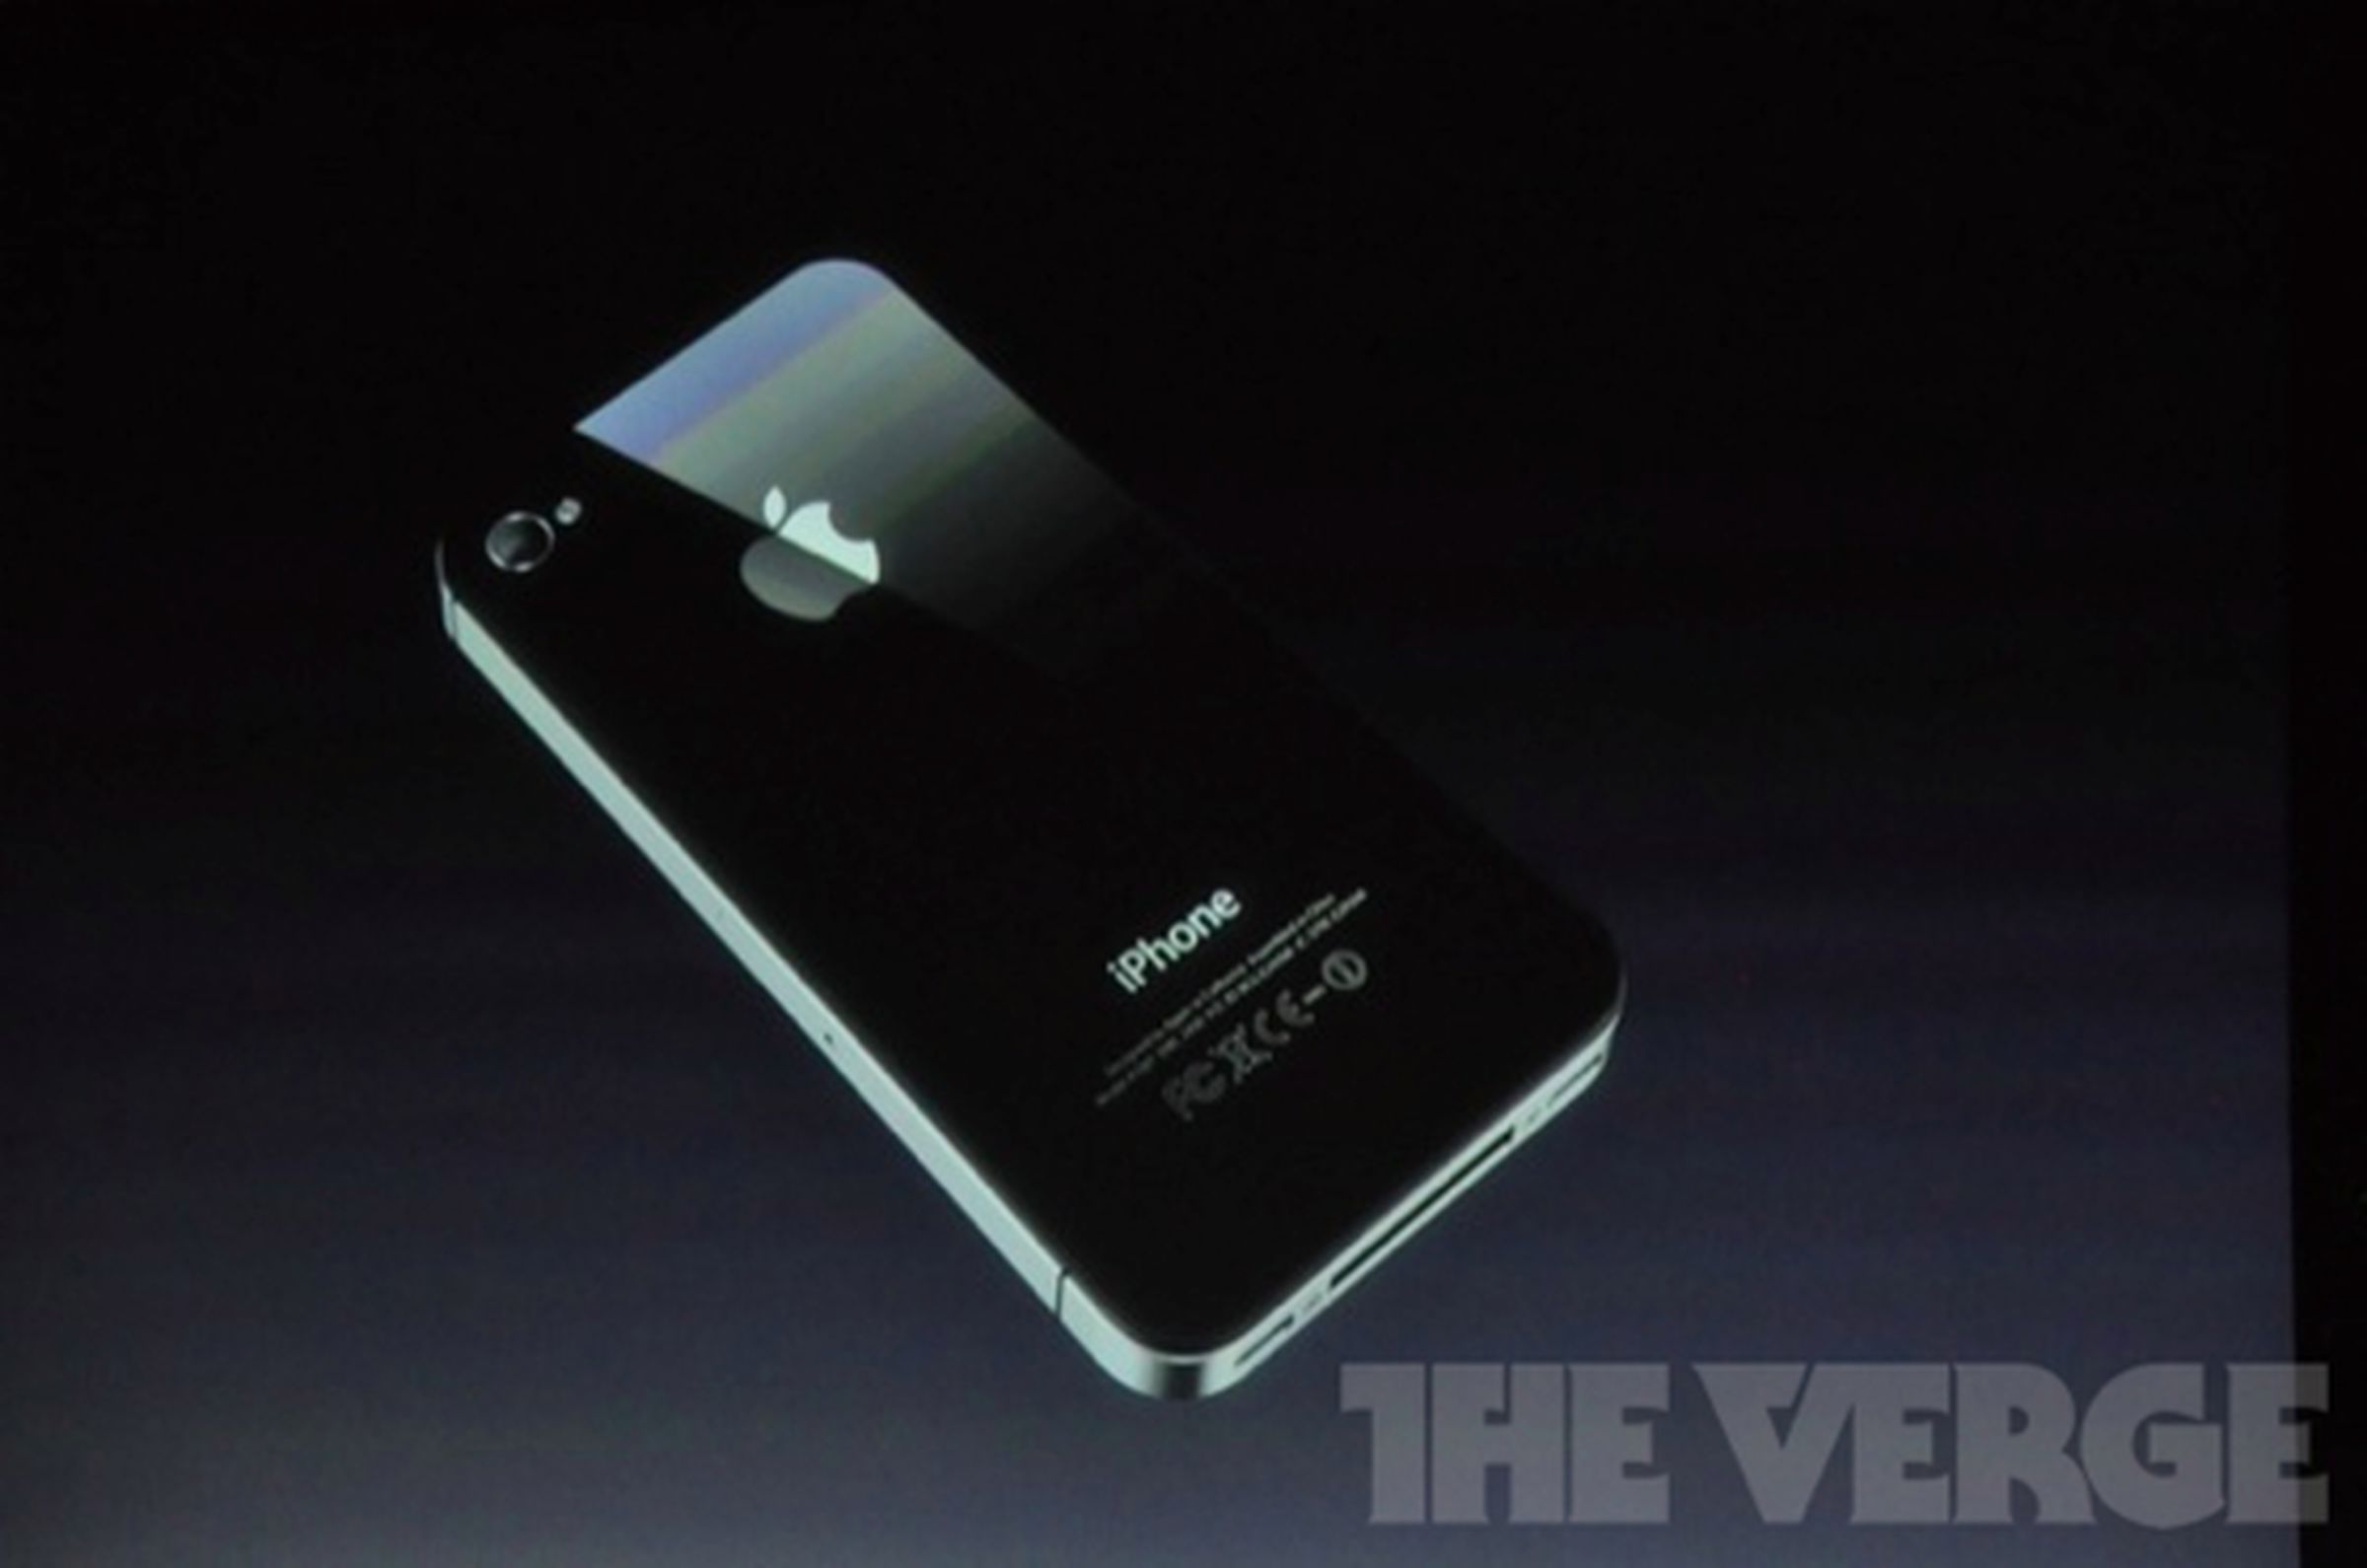 iPhone 4S announced, available October 14th starting at $199